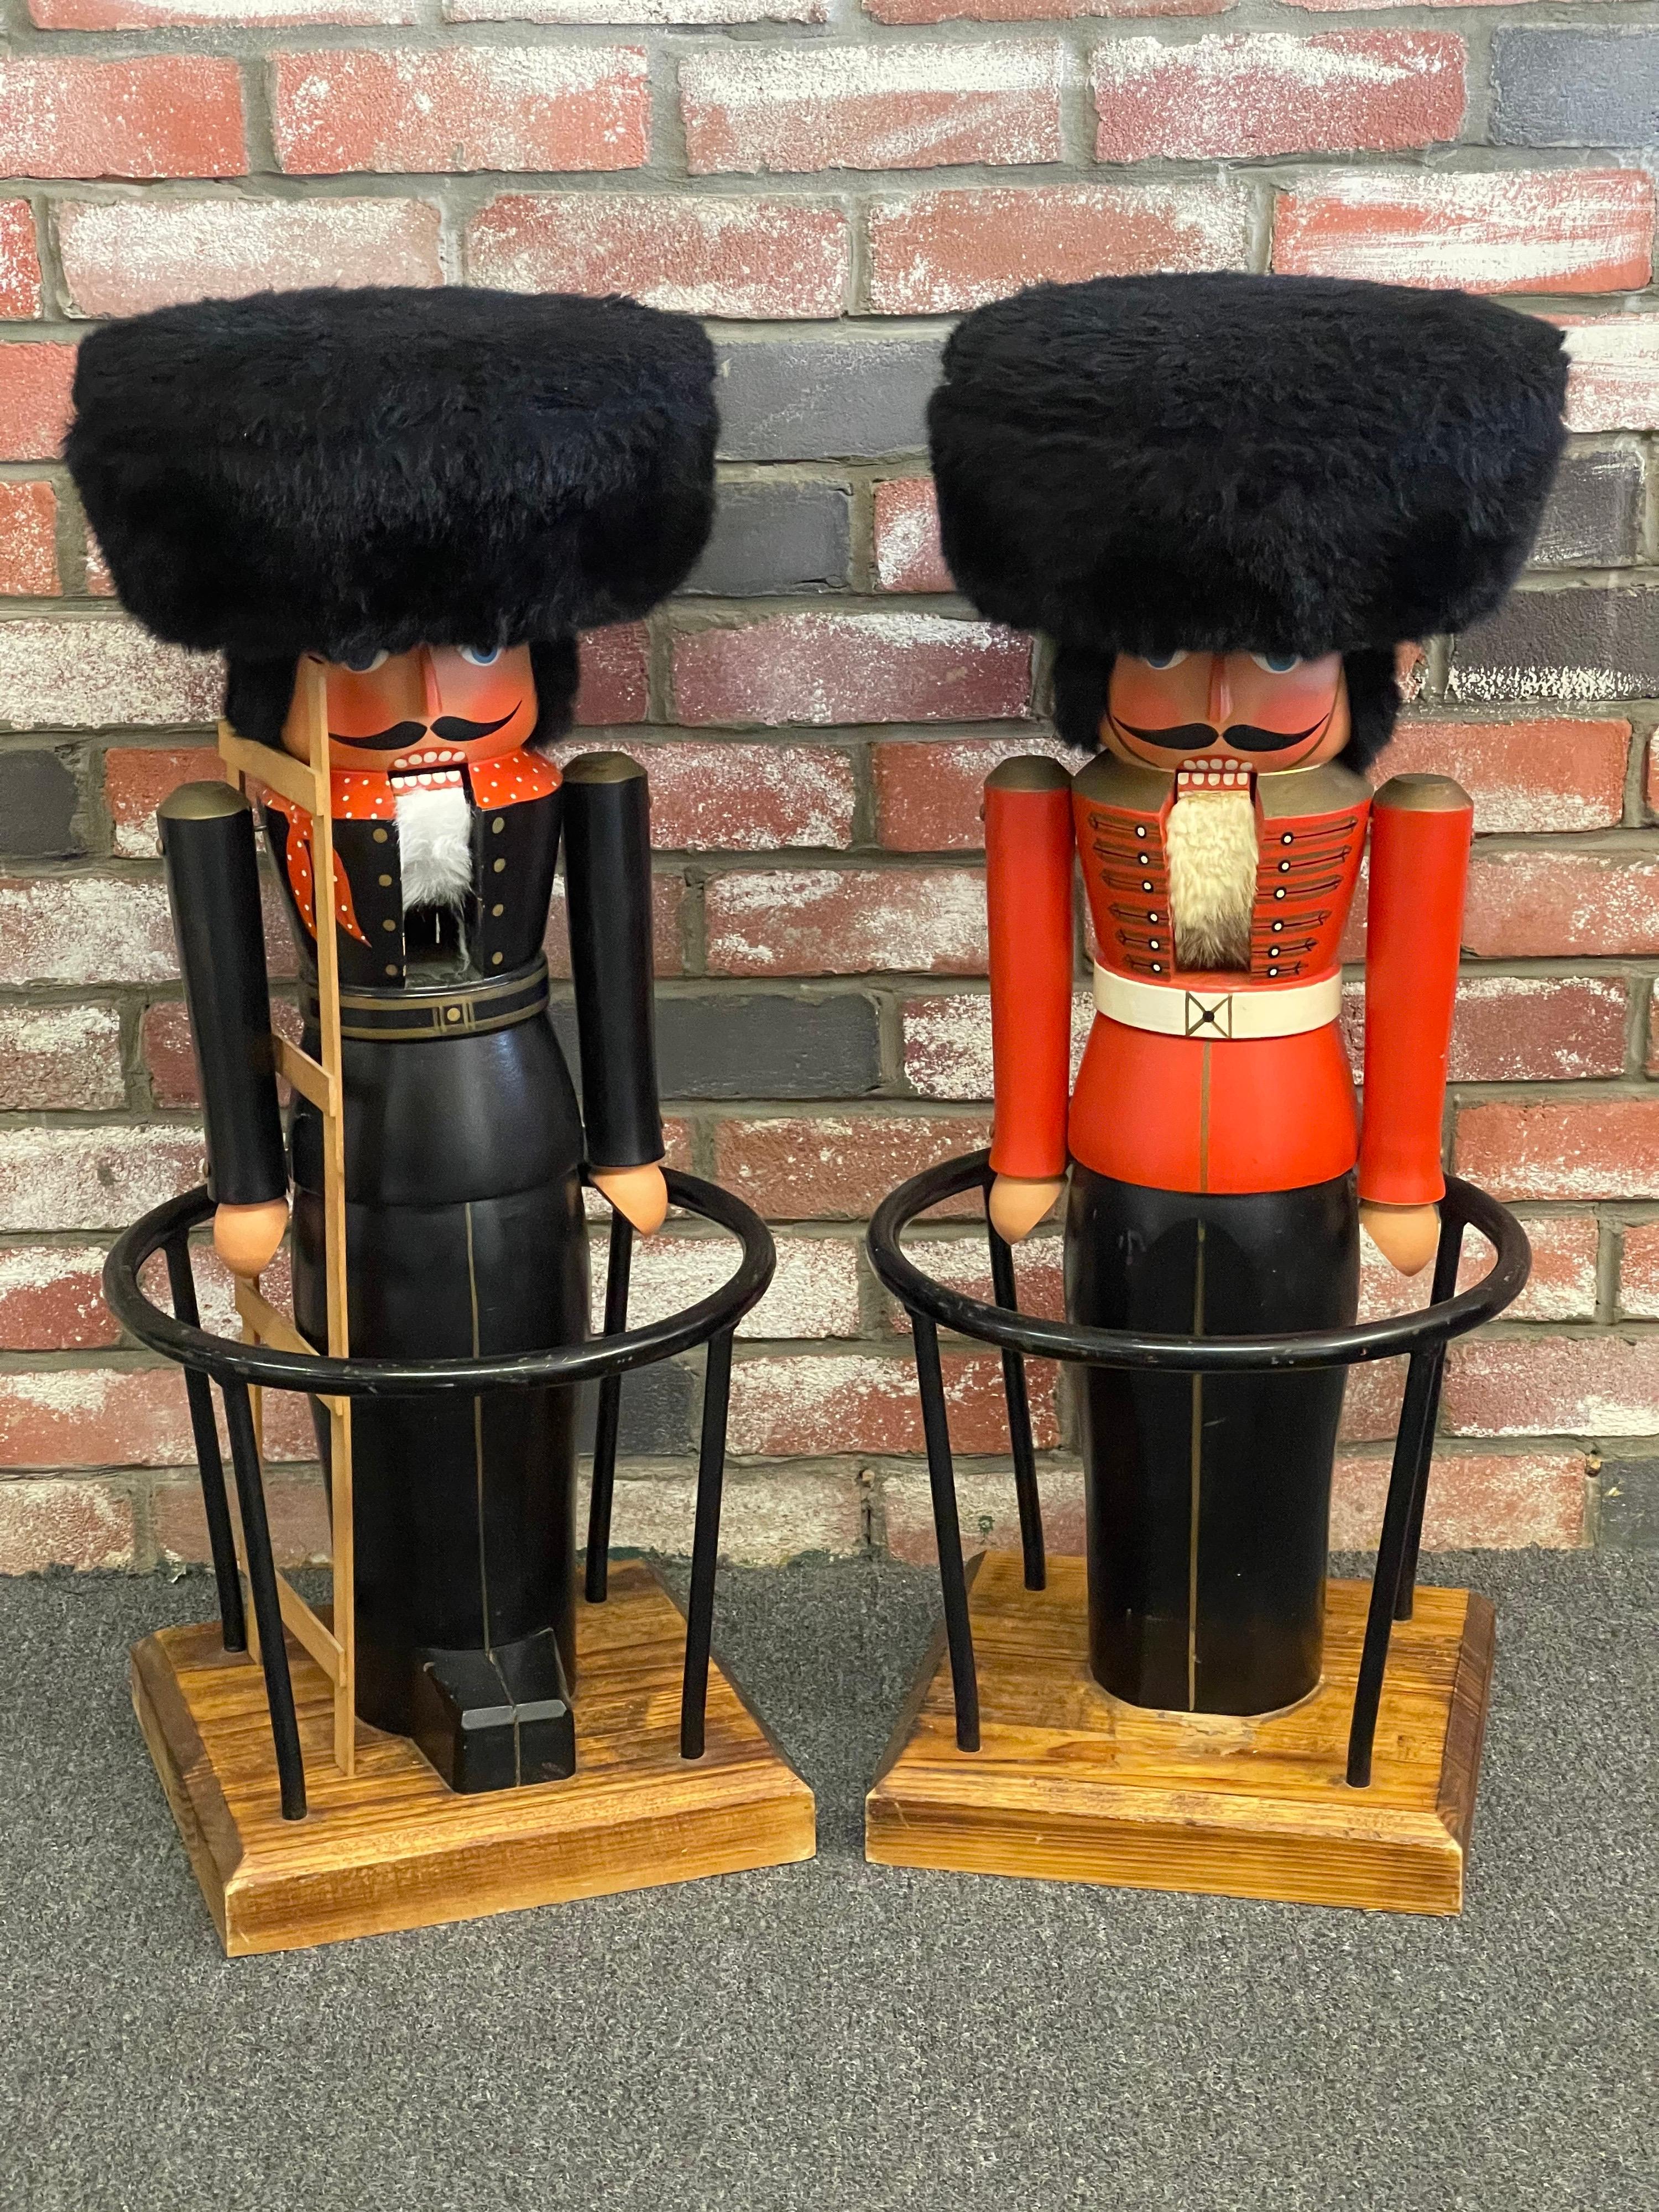 Very rare vintage pair of German nutcracker bar stools by Volkmar Matthes, circa 1960s. These stools are handmade in Germany and measure 13